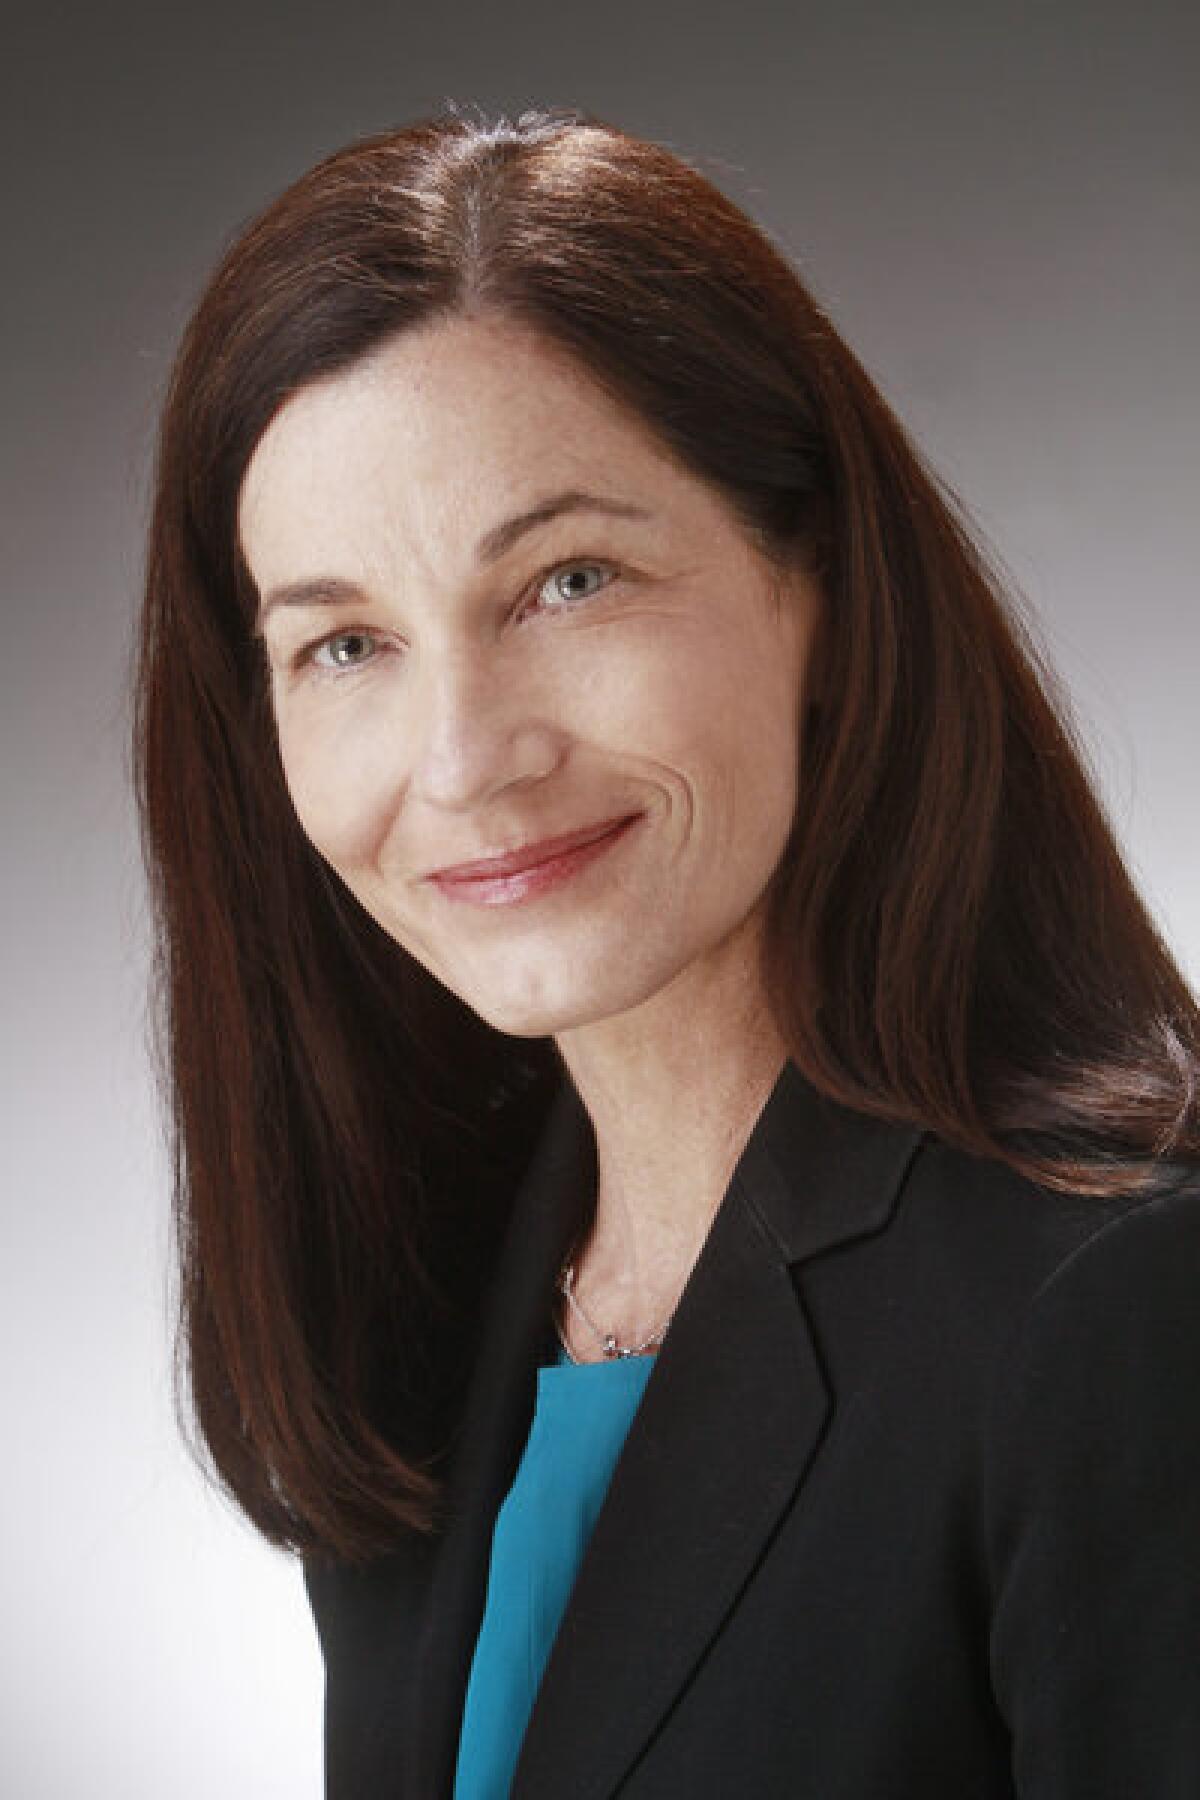 Kathy Thomson was promoted to chief operating officer of Tribune's publishing unit.